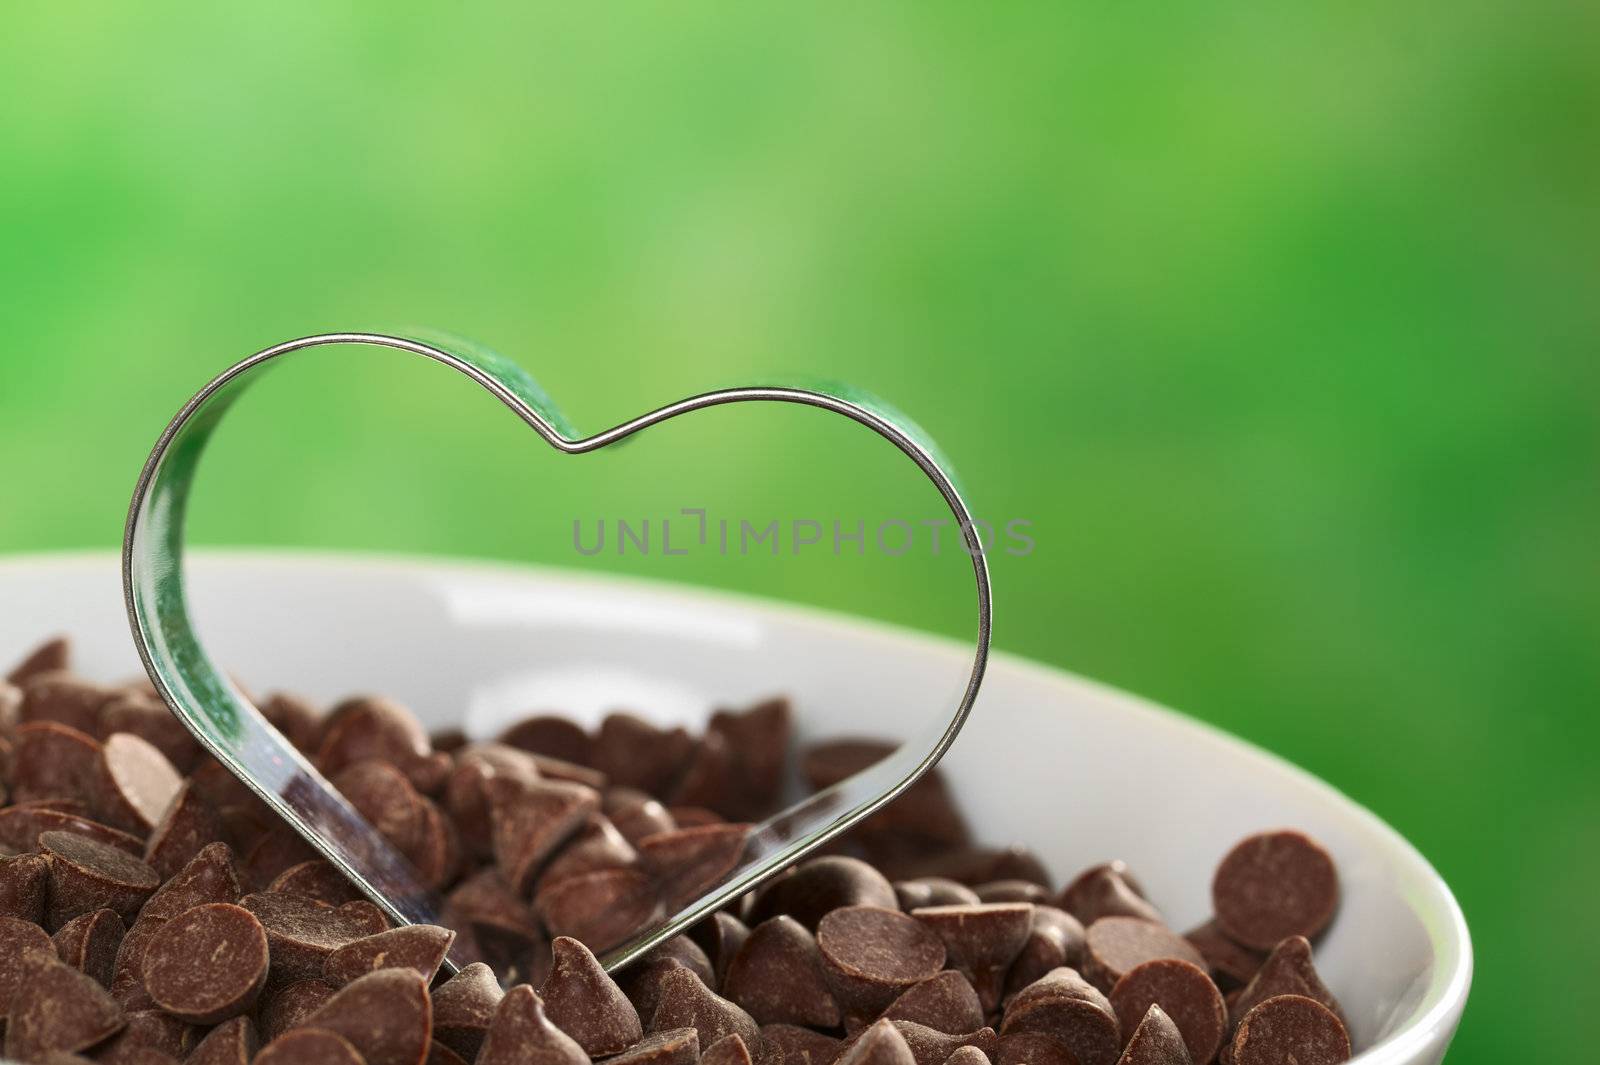 Heart-shaped cookie cutter on chocolate chips (Selective Focus, Focus on the front of the cookie cutter) 